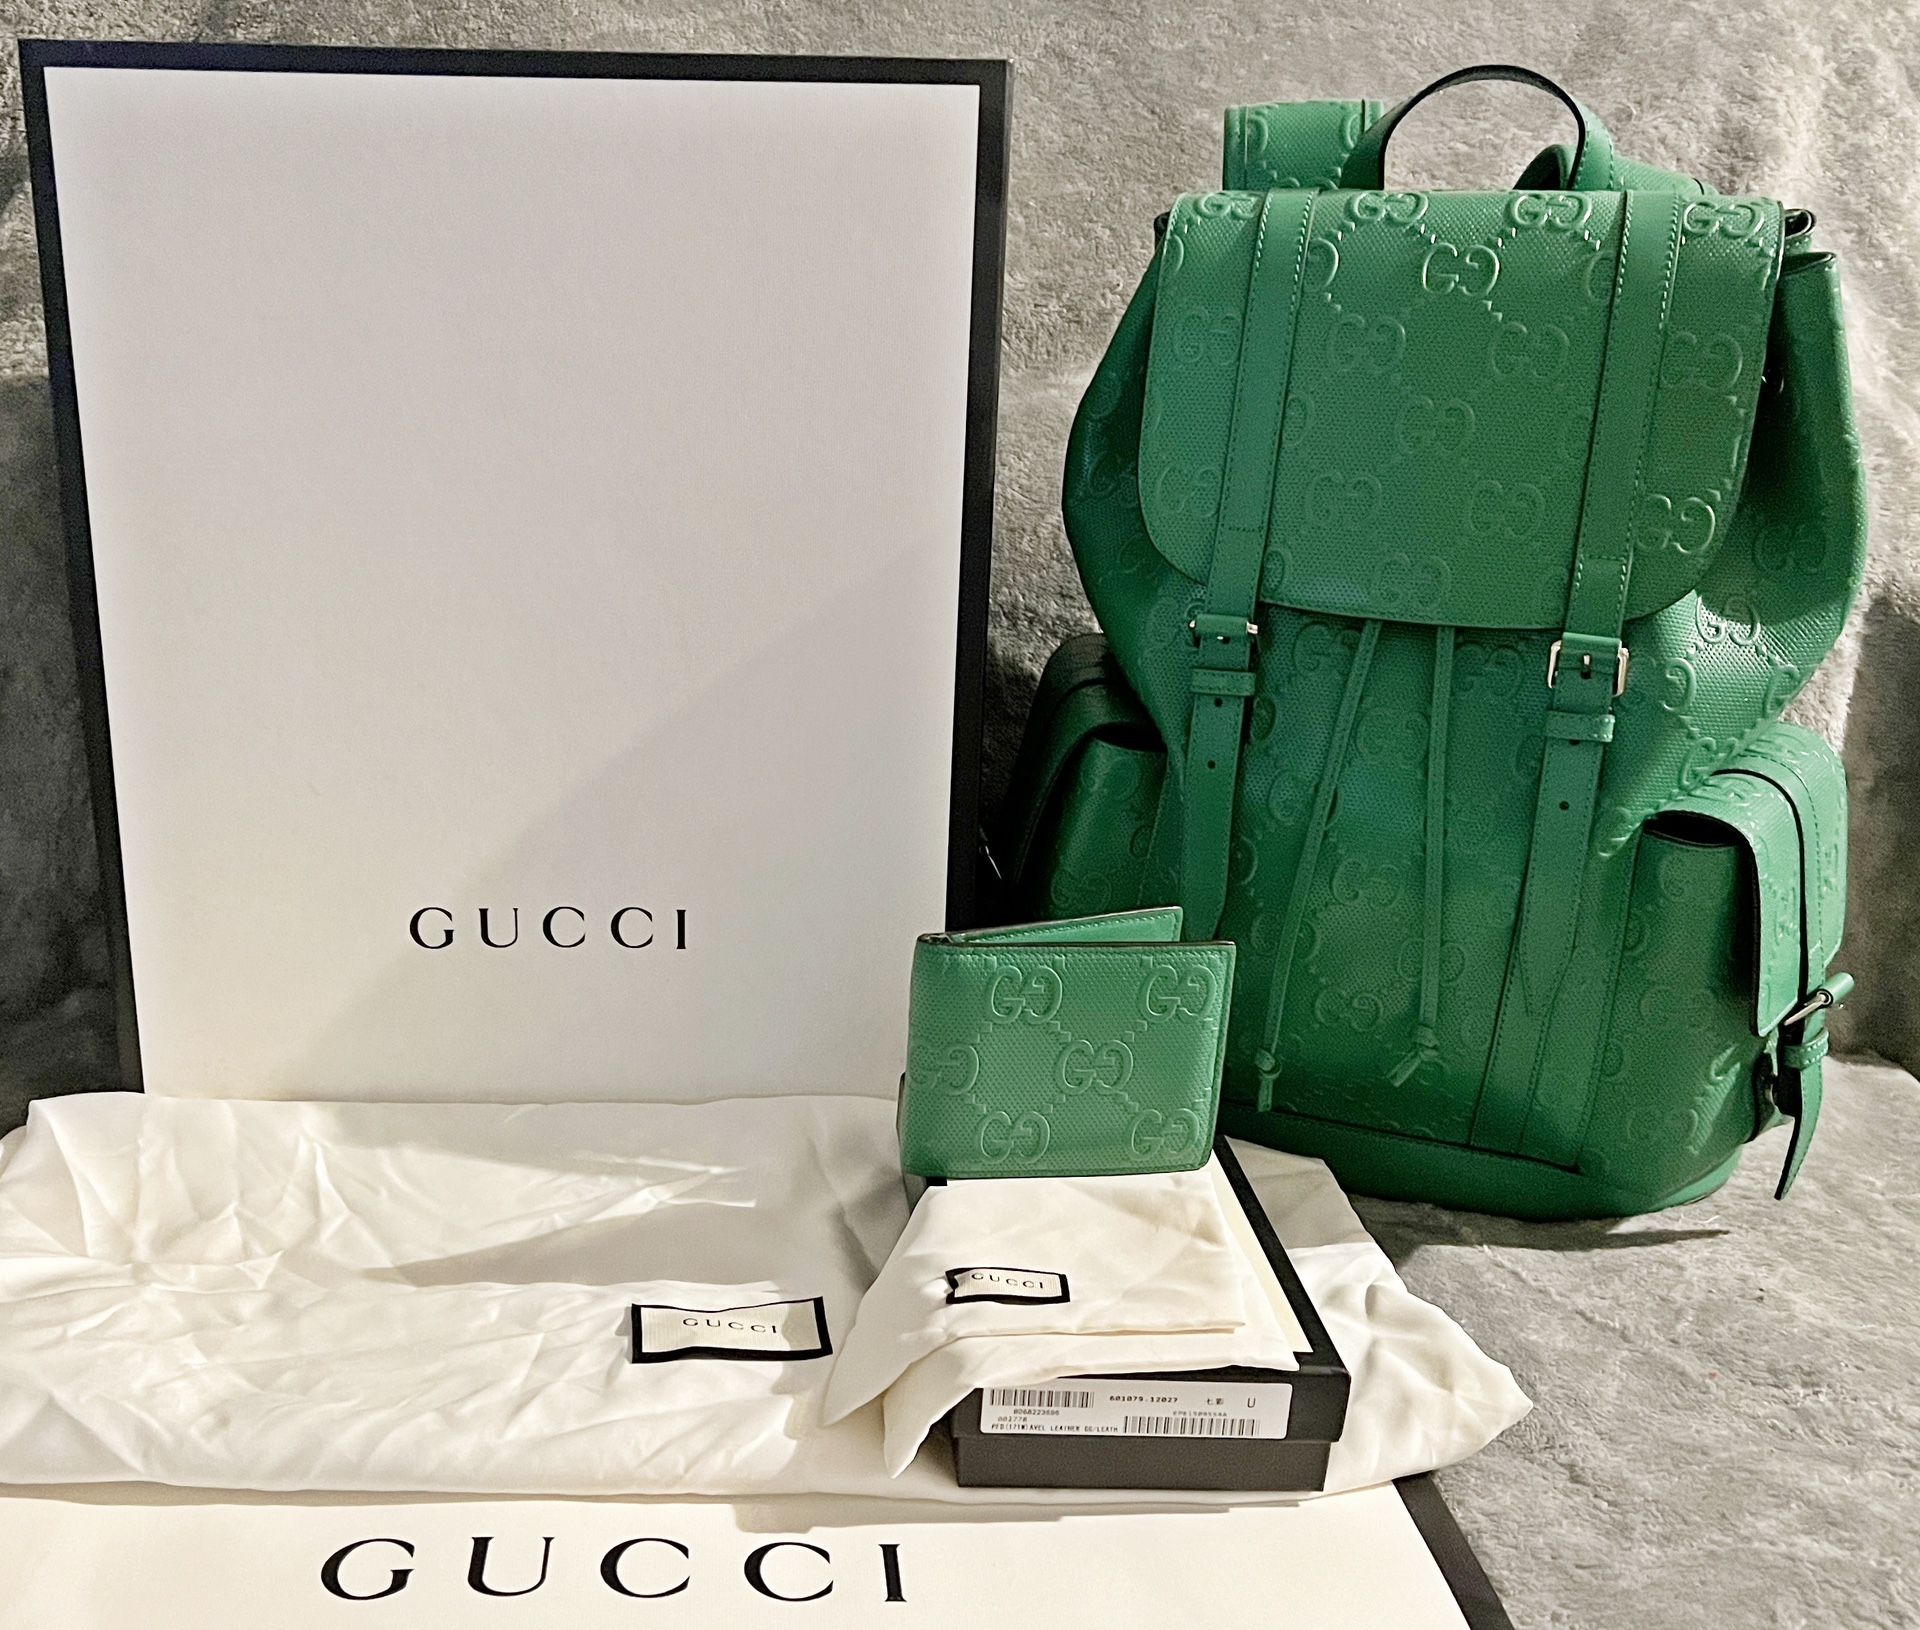 Limited Edition Gucci Green Leather Backpack & Wallet